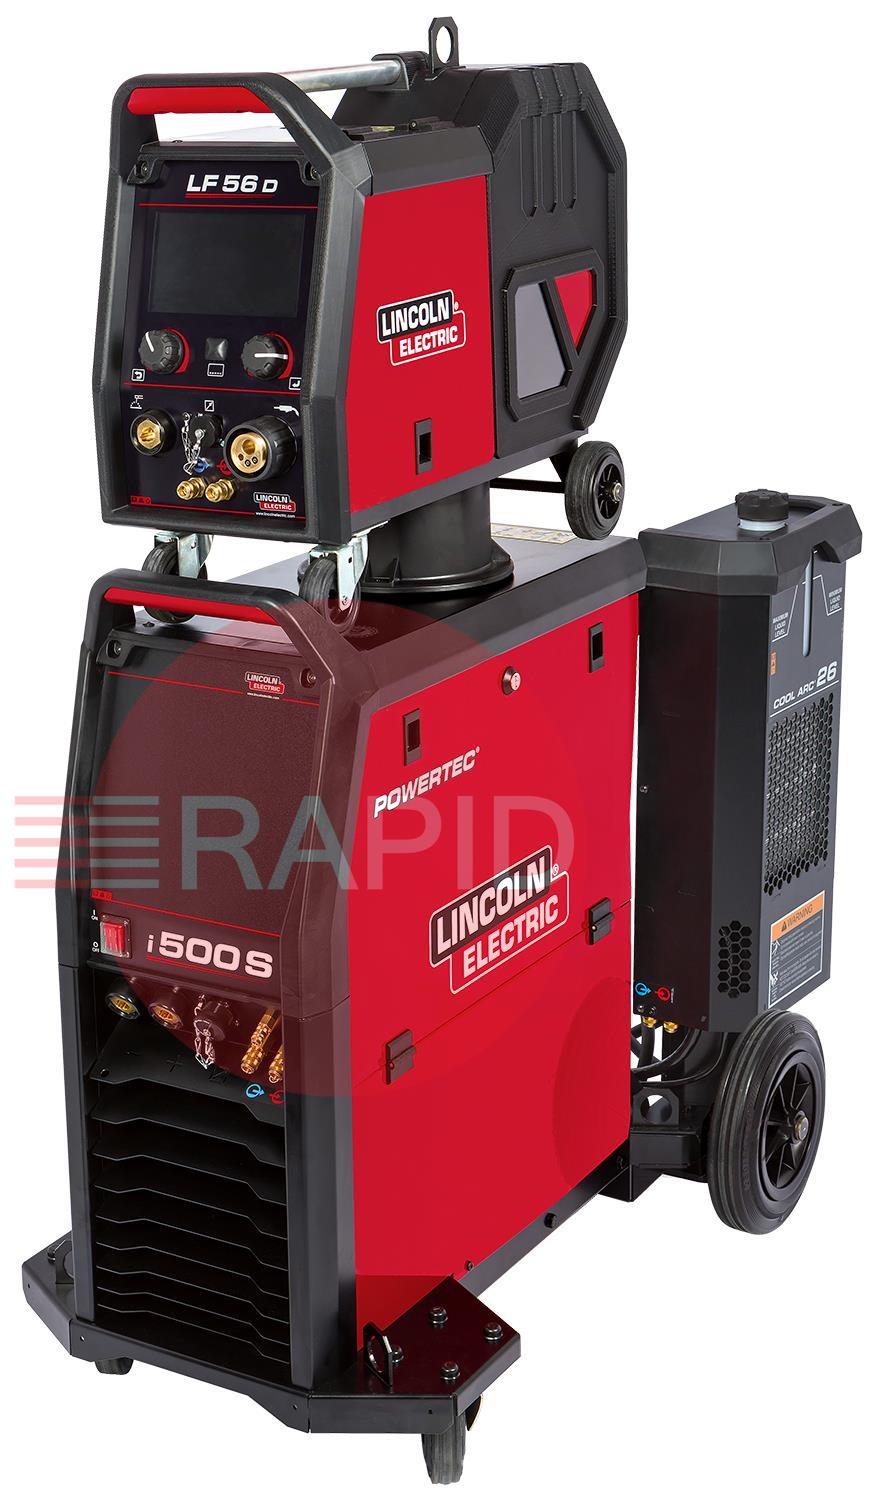 K14185-5X-1WP  Lincoln Powertec i500S MIG Welder, Water-Cooled Ready to Weld Packages - 400v, 3ph